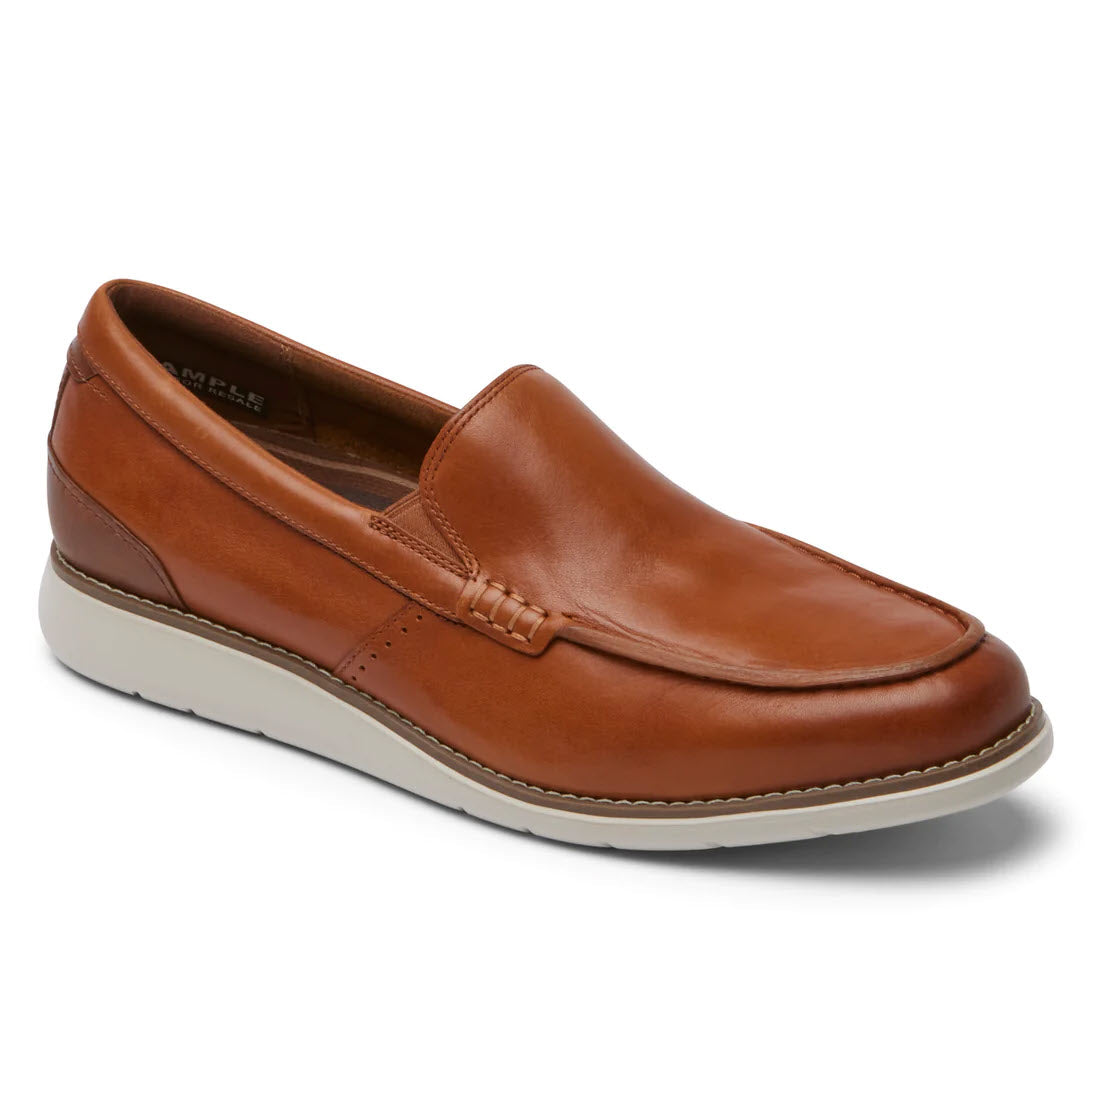 A single Rockport Total Motion Craft Venetian Cognac men&#39;s loafer with a white sole, displayed against a plain white background.